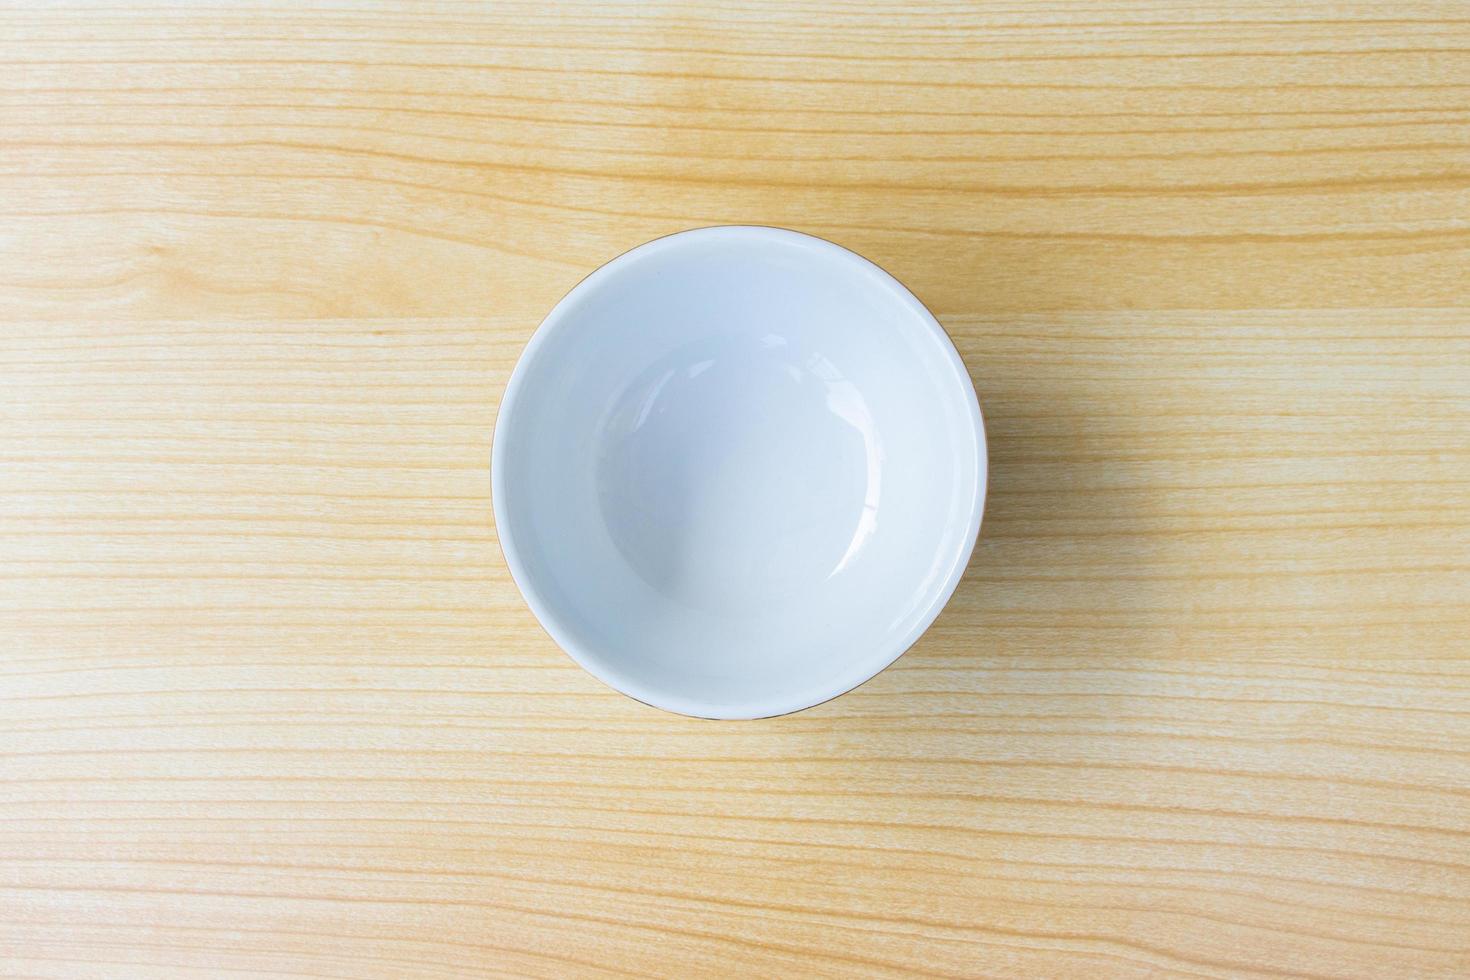 An empty bowl isolated on wooden background, after some edits. photo